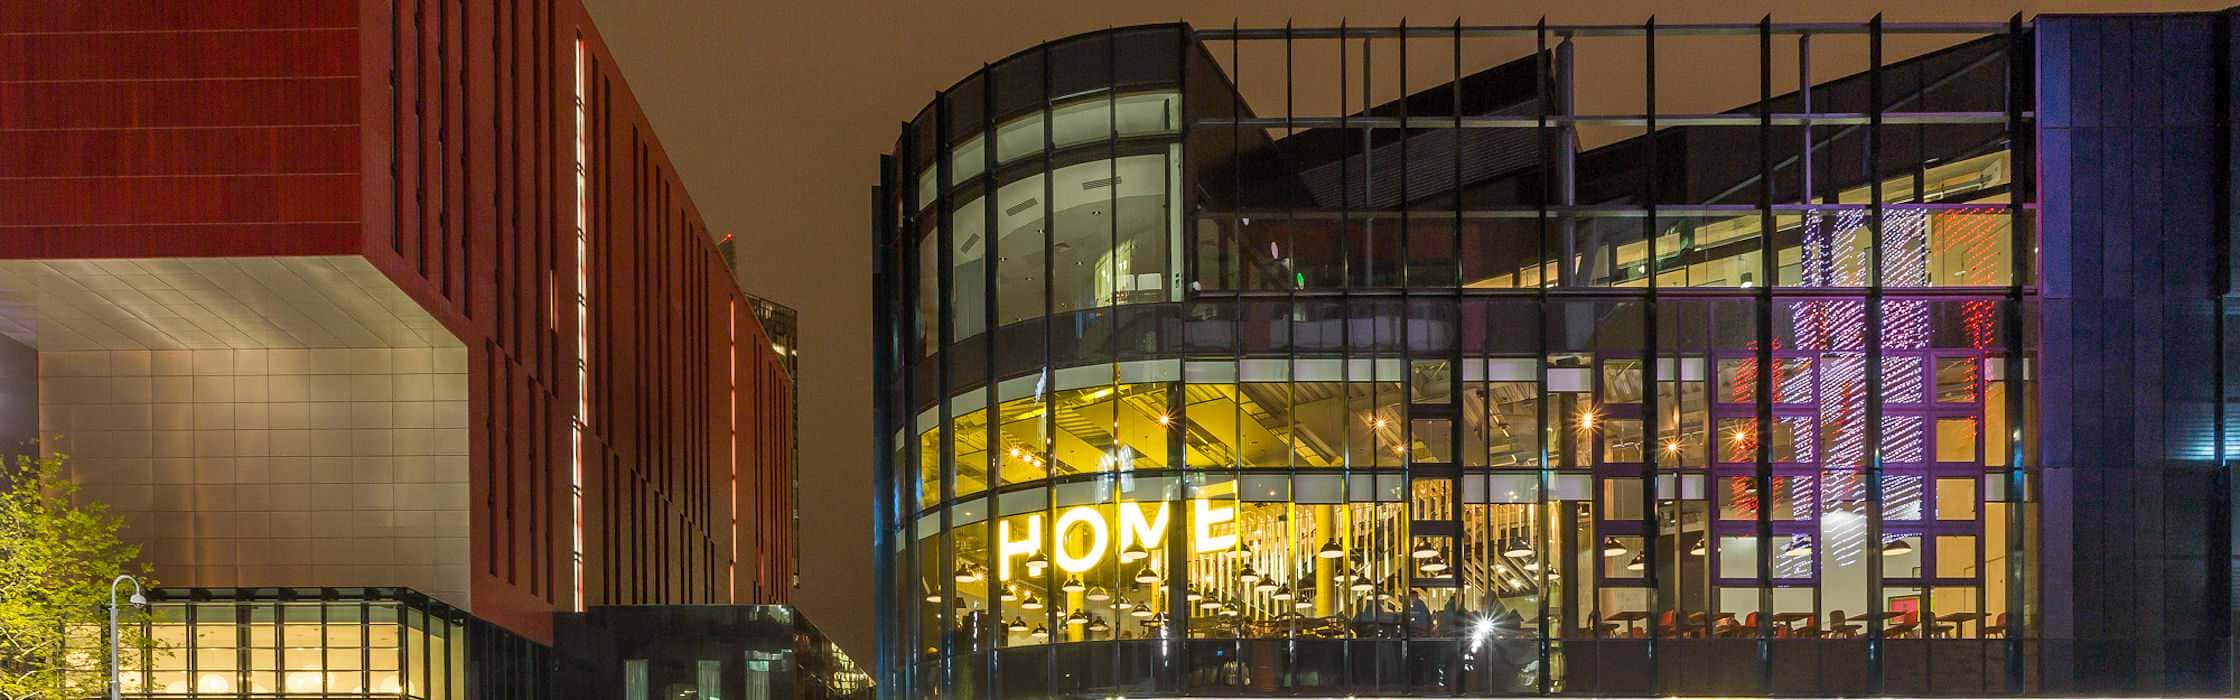 What's On at HOME, Manchester